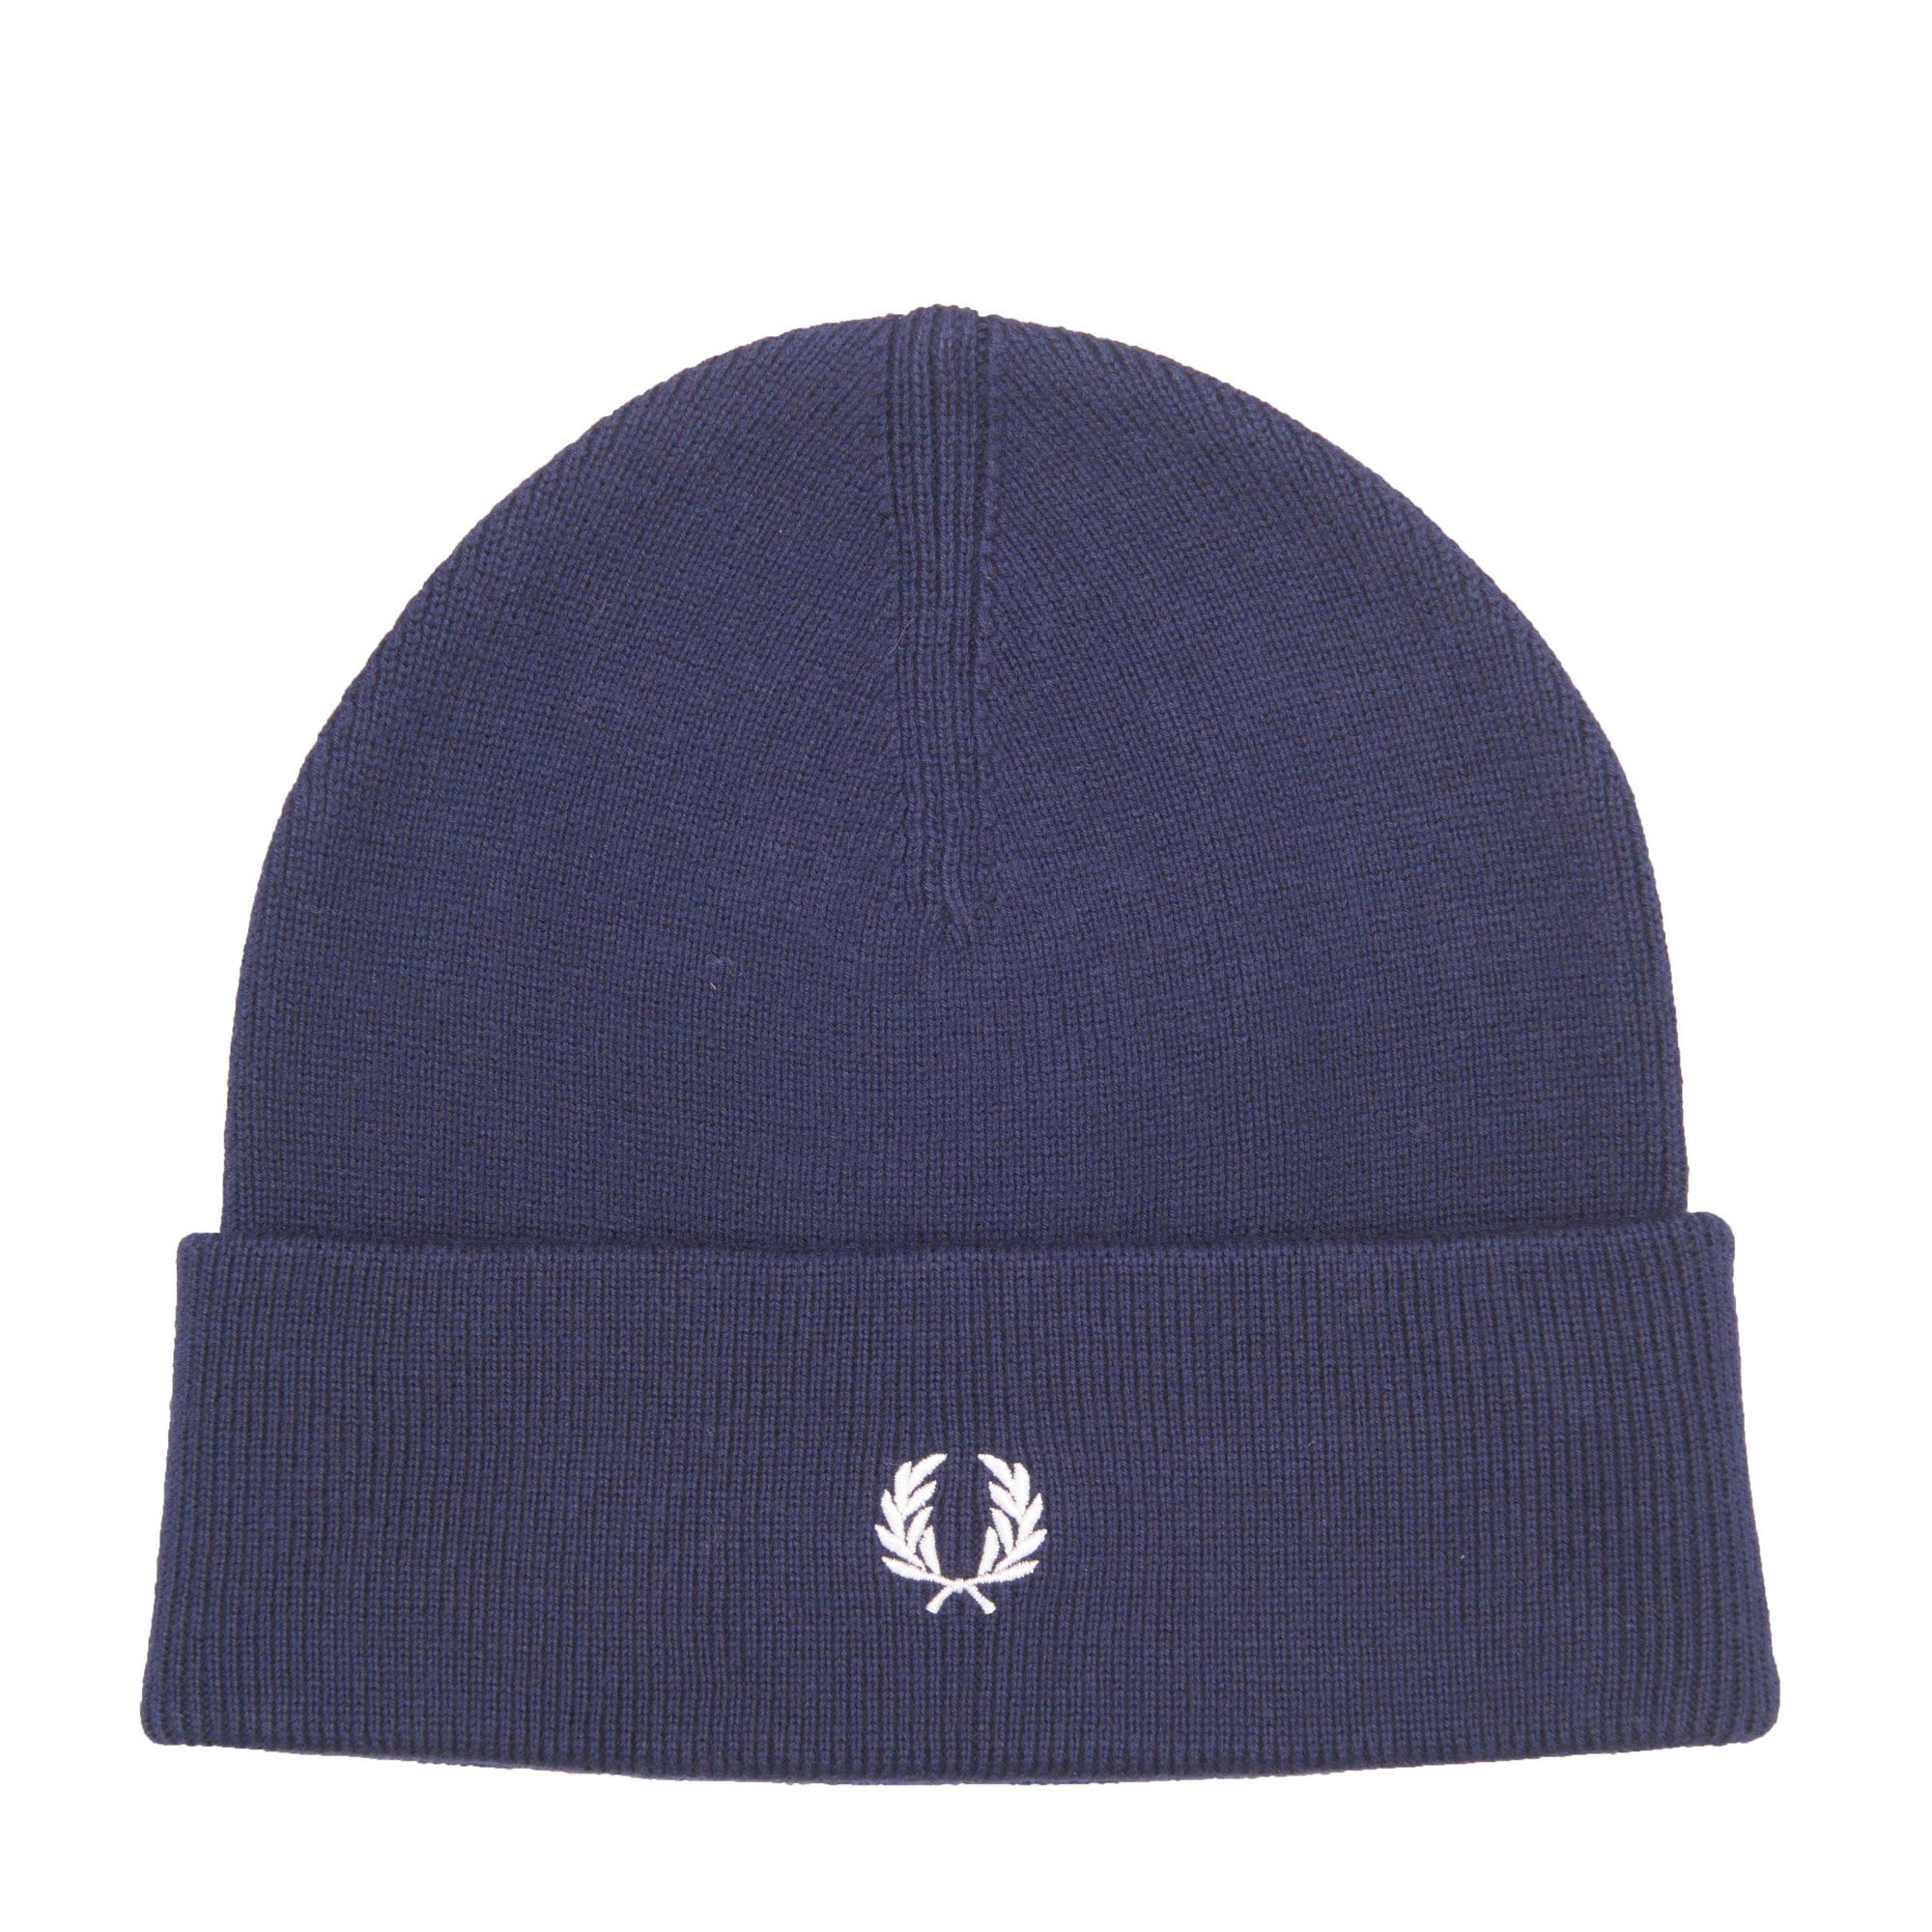 Fred Perry Muts Donker blauw 080345-002-1